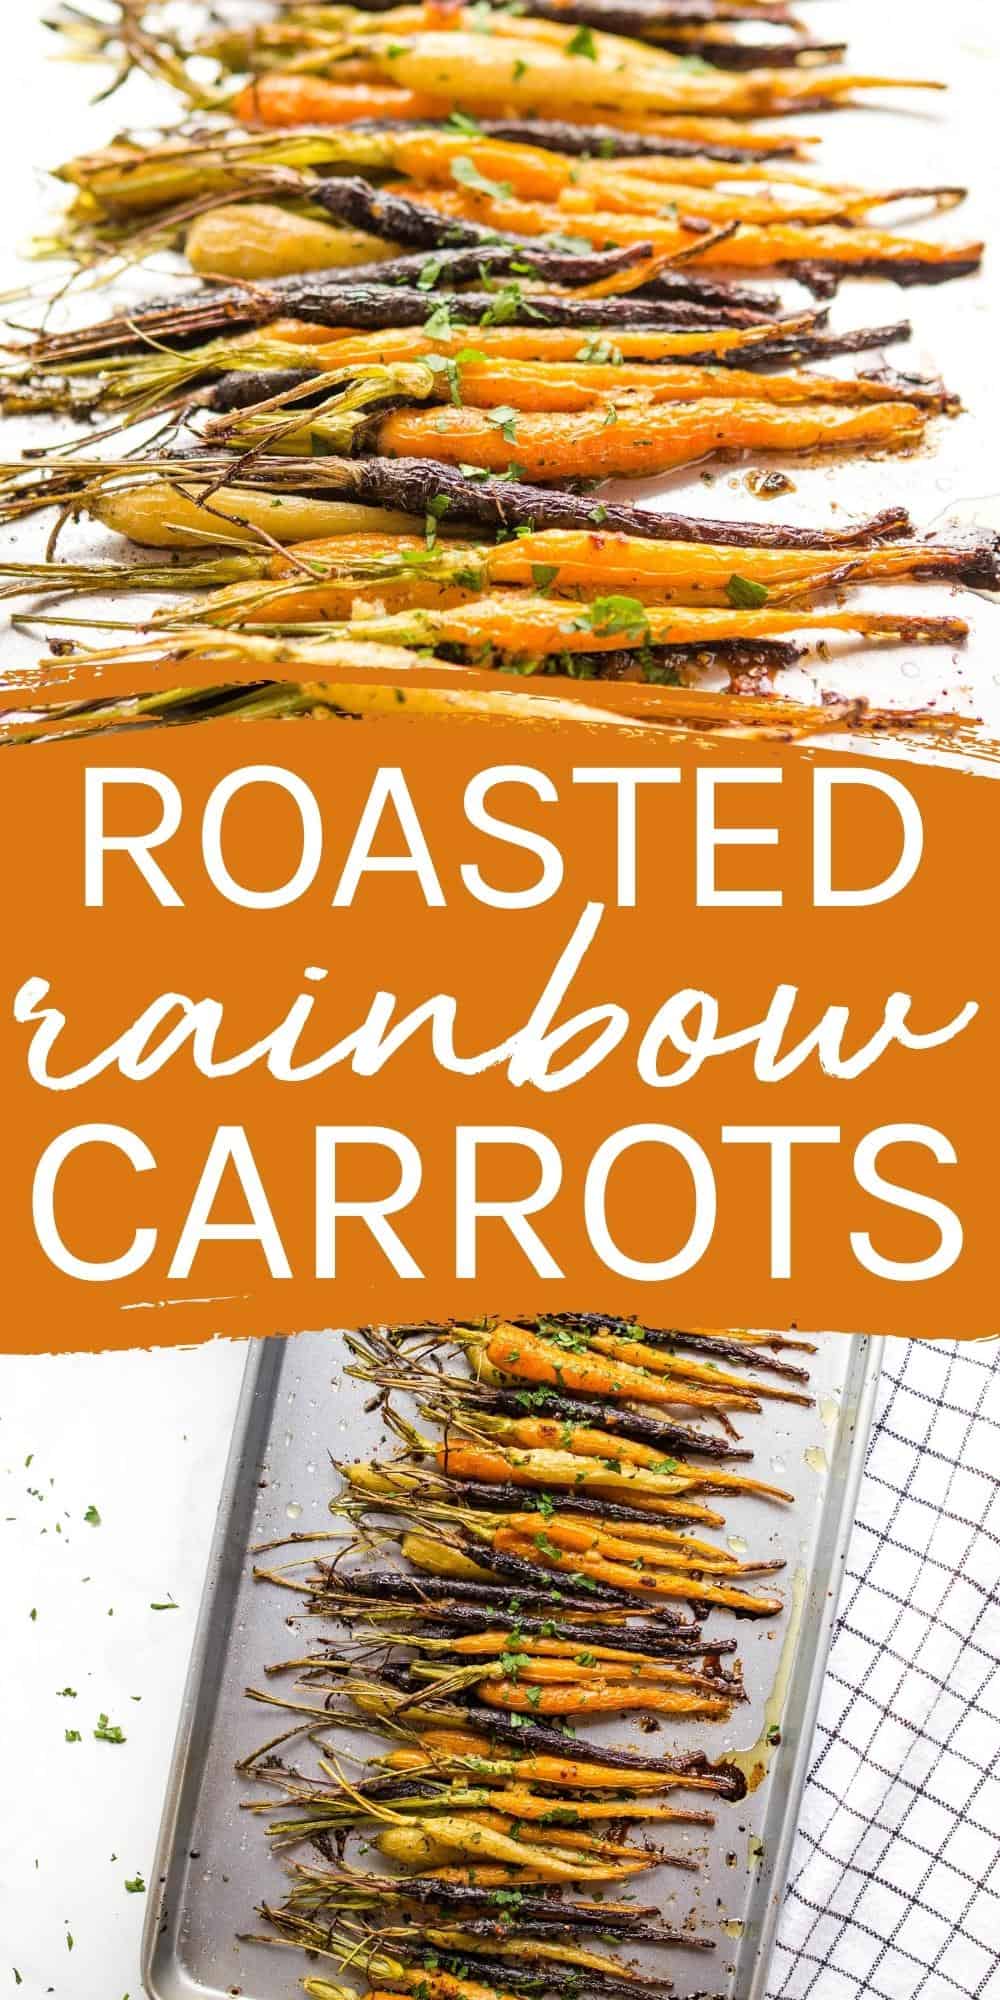 These Rainbow Carrots are the perfect simple side dish with an easy honey glaze - on the table in 25 minutes and only 5 ingredients! Recipe from thebusybaker.ca! #roastedcarrots #rainbowcarrots #sidedish #healthy #vegetarian #holiday #christmas #holidaysidedish #easy #simple #recipe via @busybakerblog